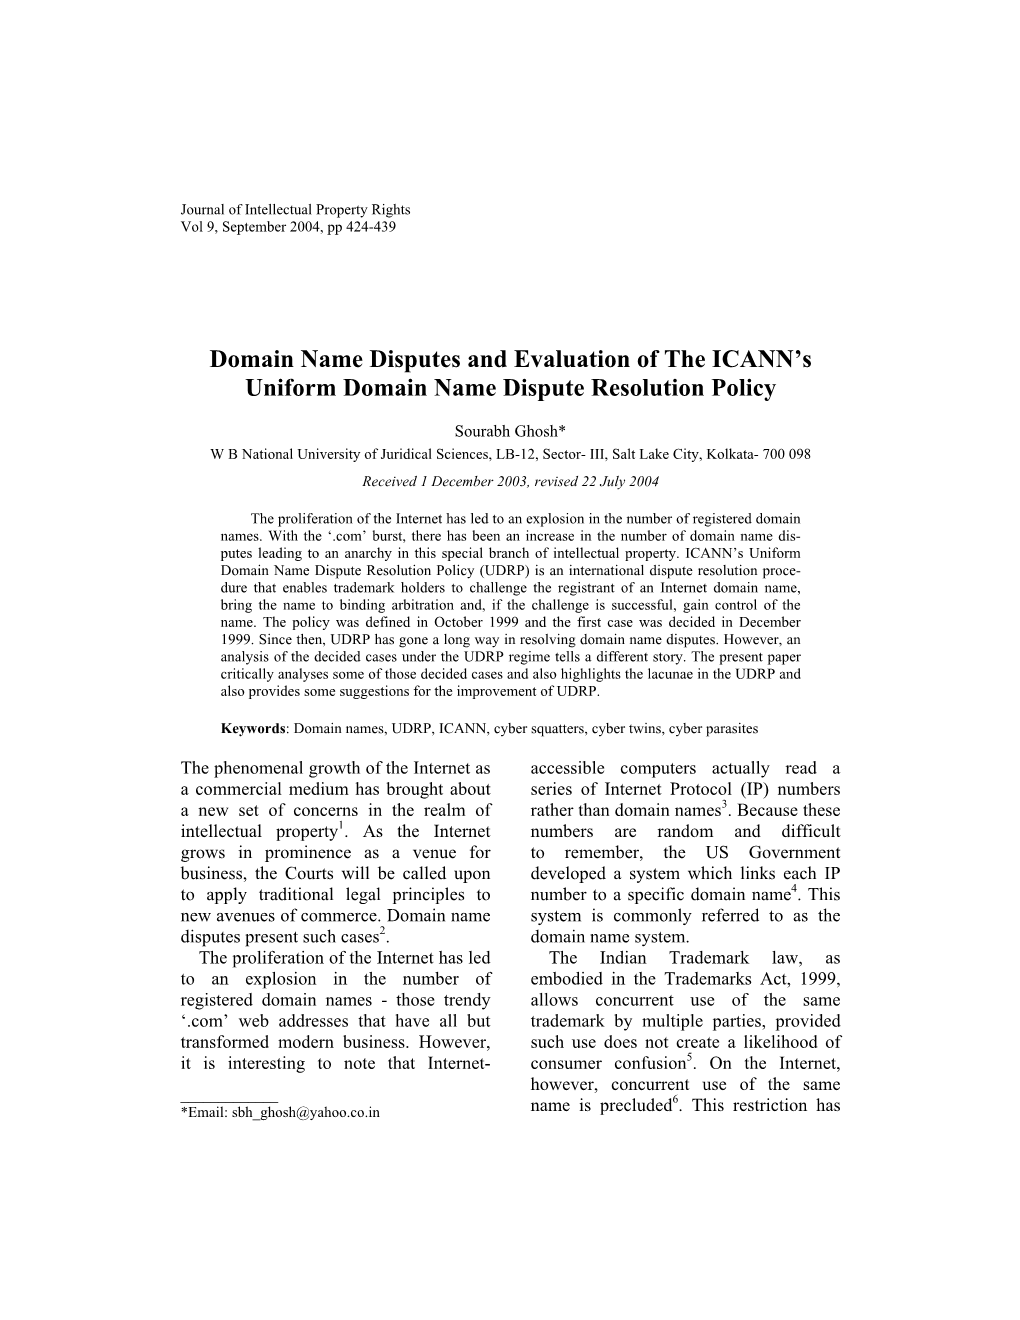 Domain Name Disputes and Evaluation of the ICANN's